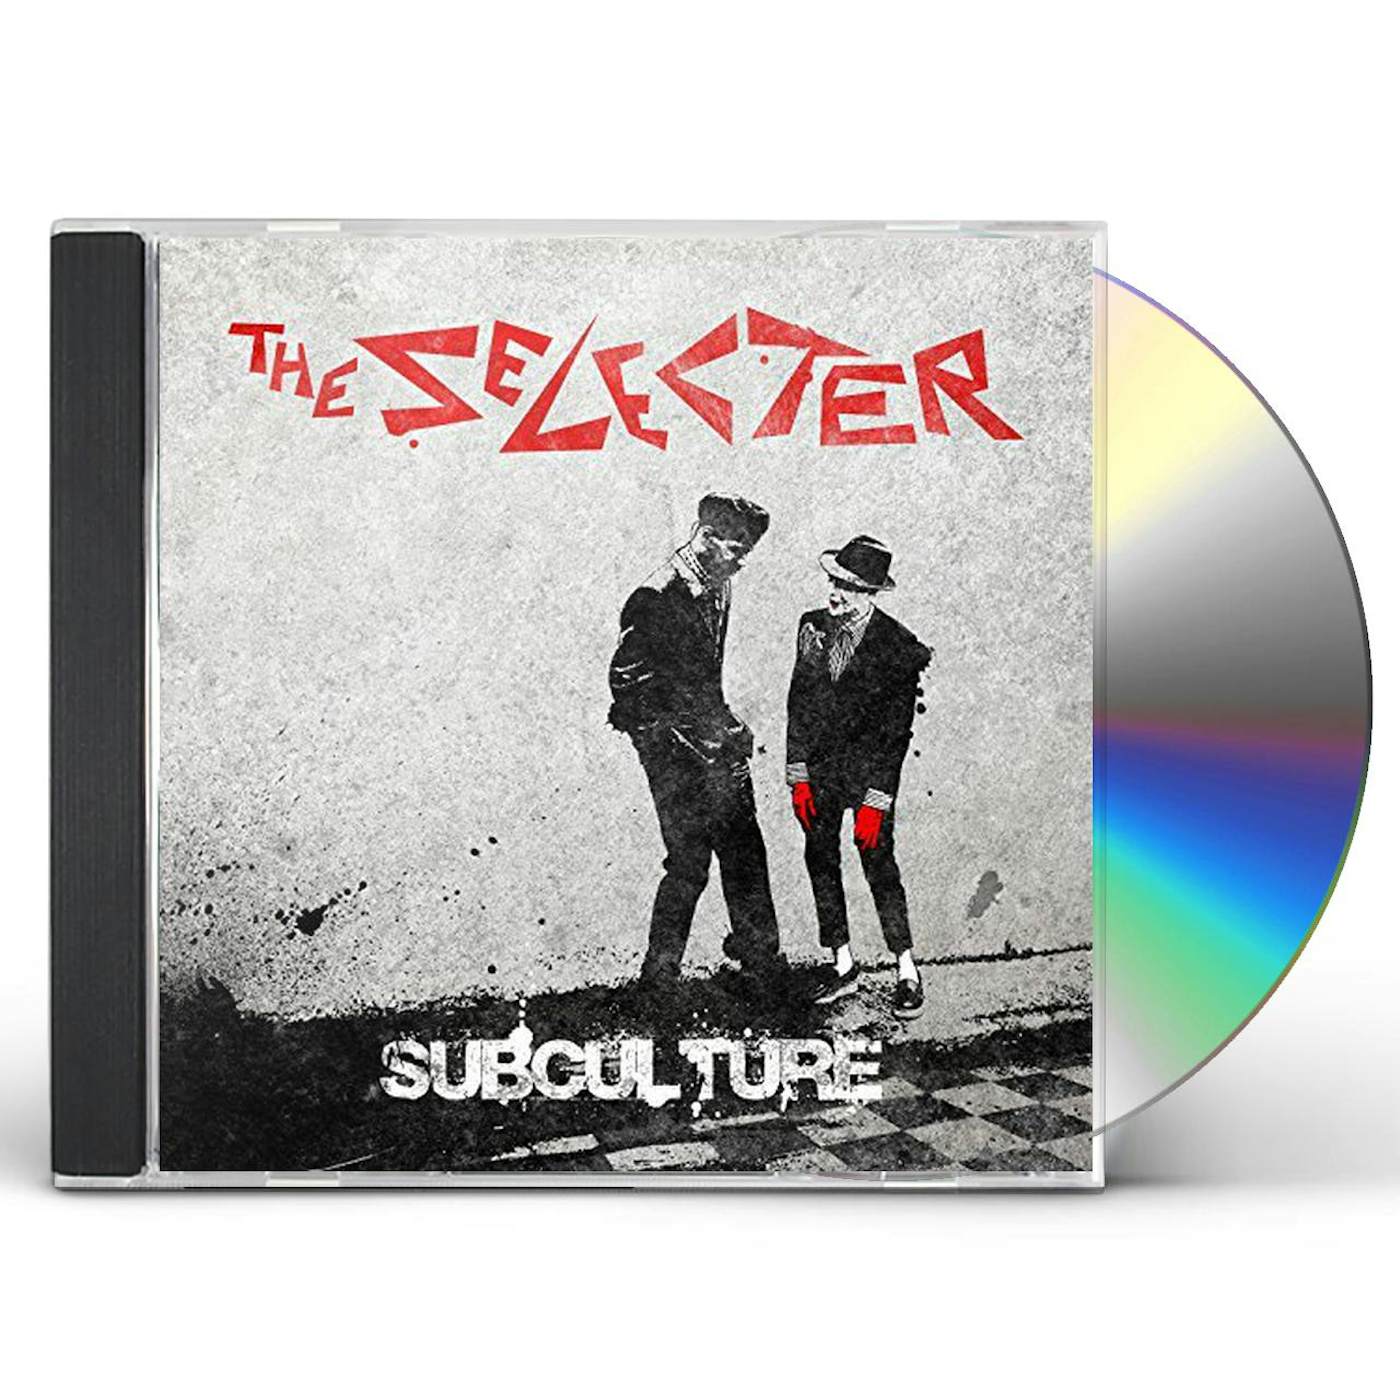 Selecter SUBCULTURE CD